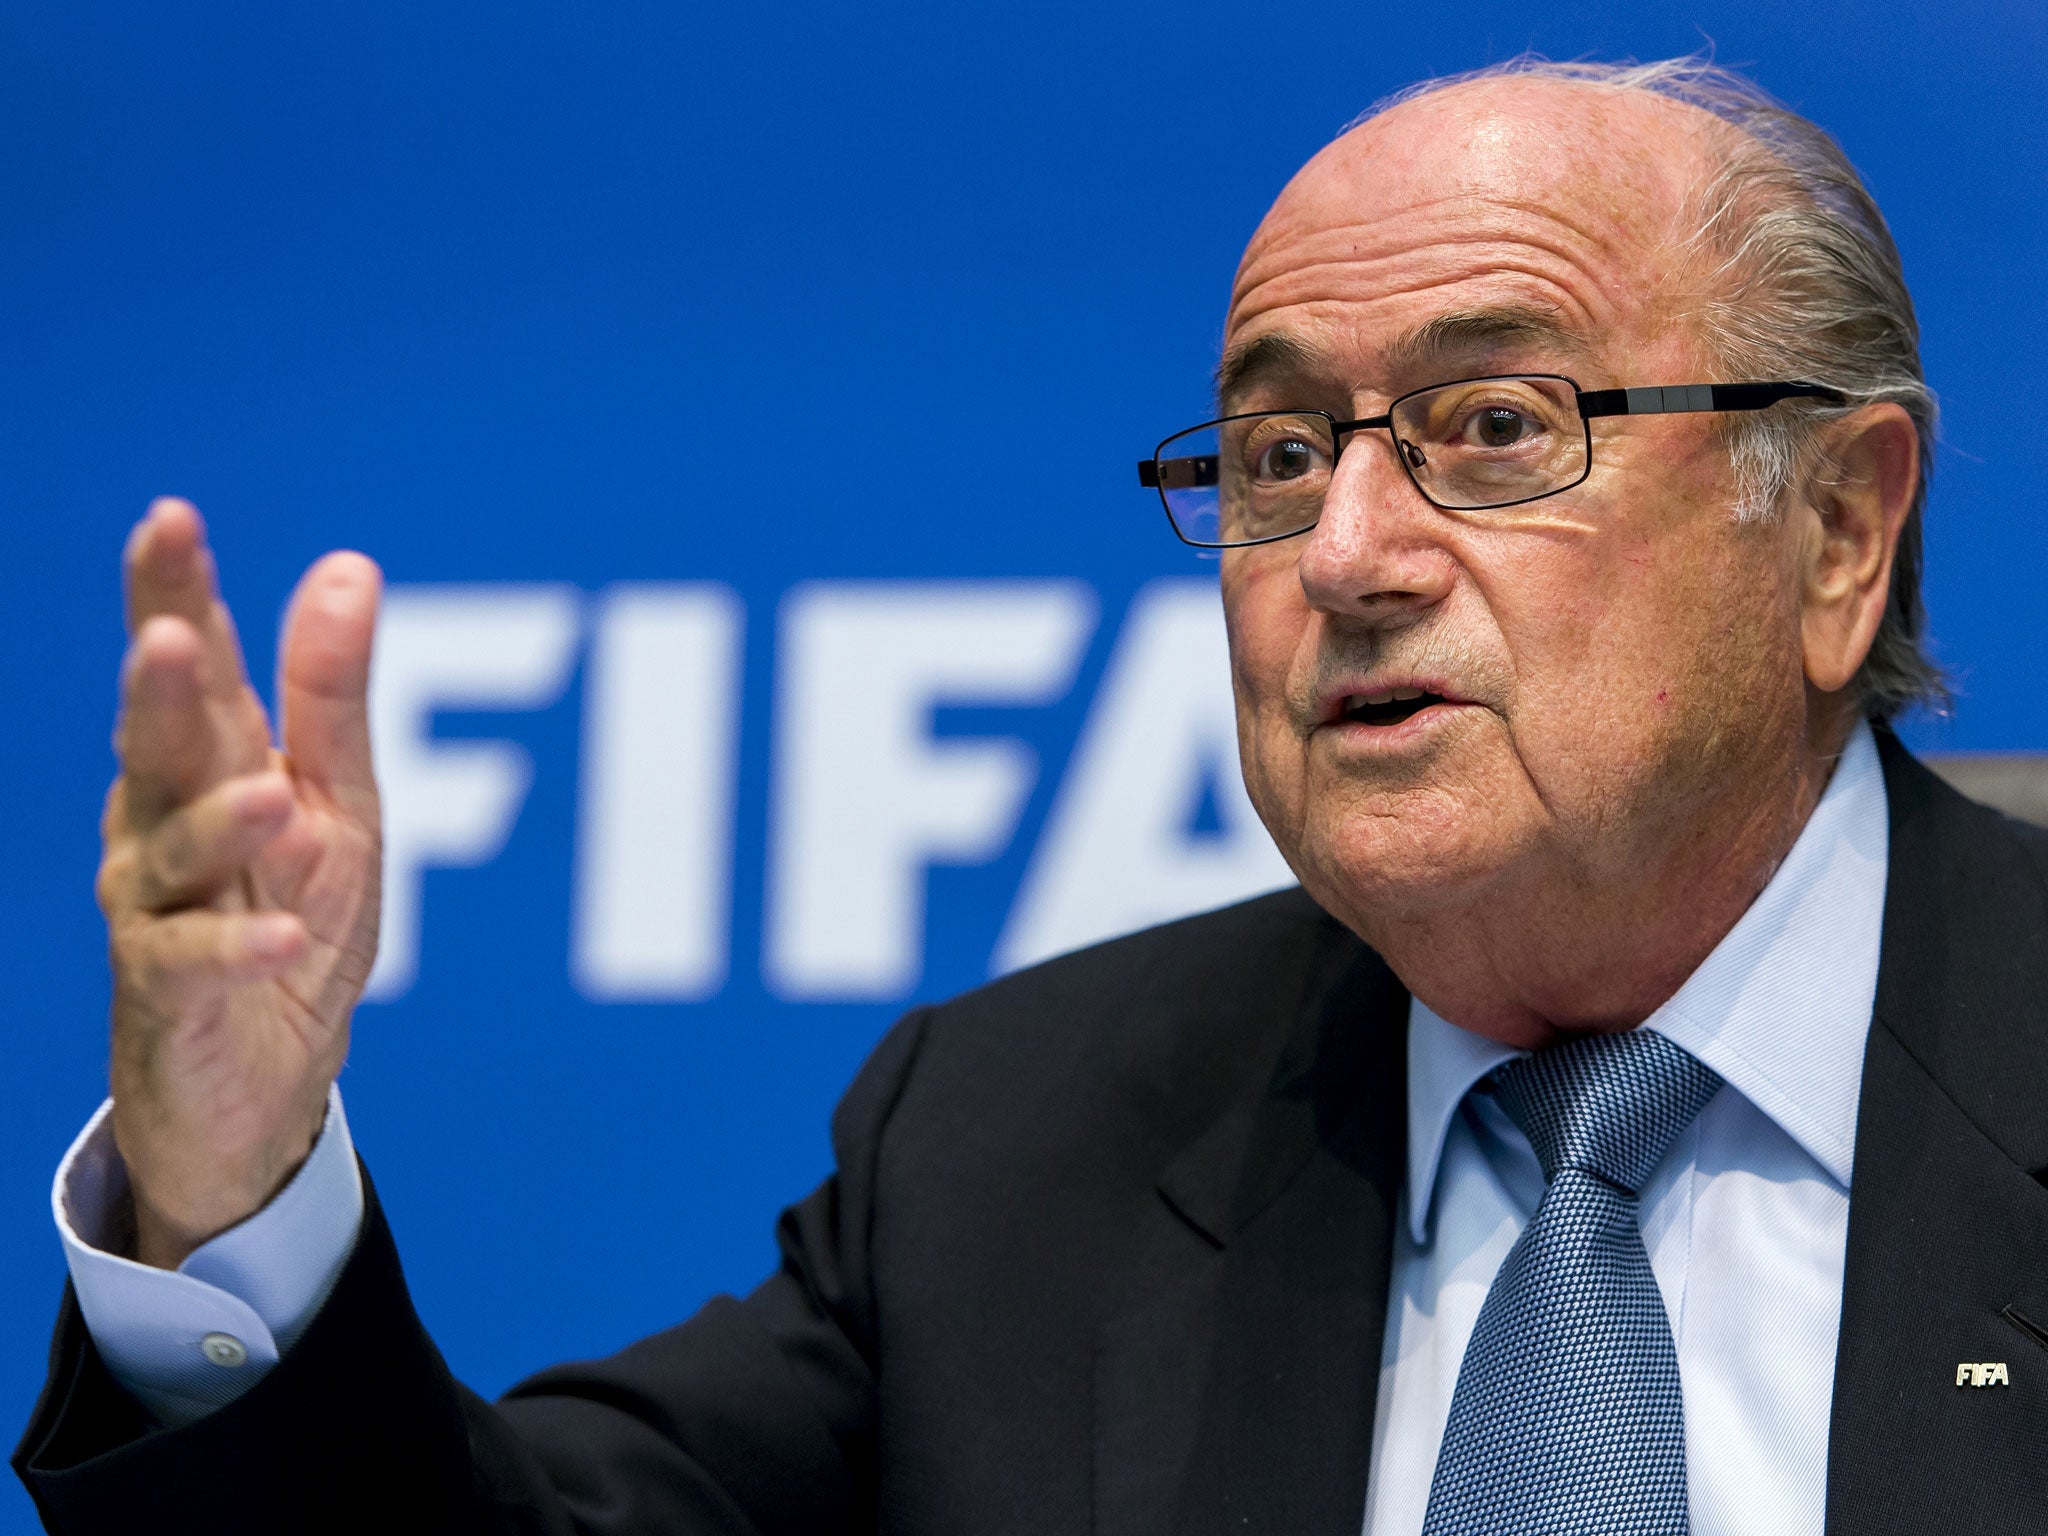 Sepp Blatter: 'There are not many names that the media haven't thrown at me in the last few years. And I would be lying to you if it did not hurt'